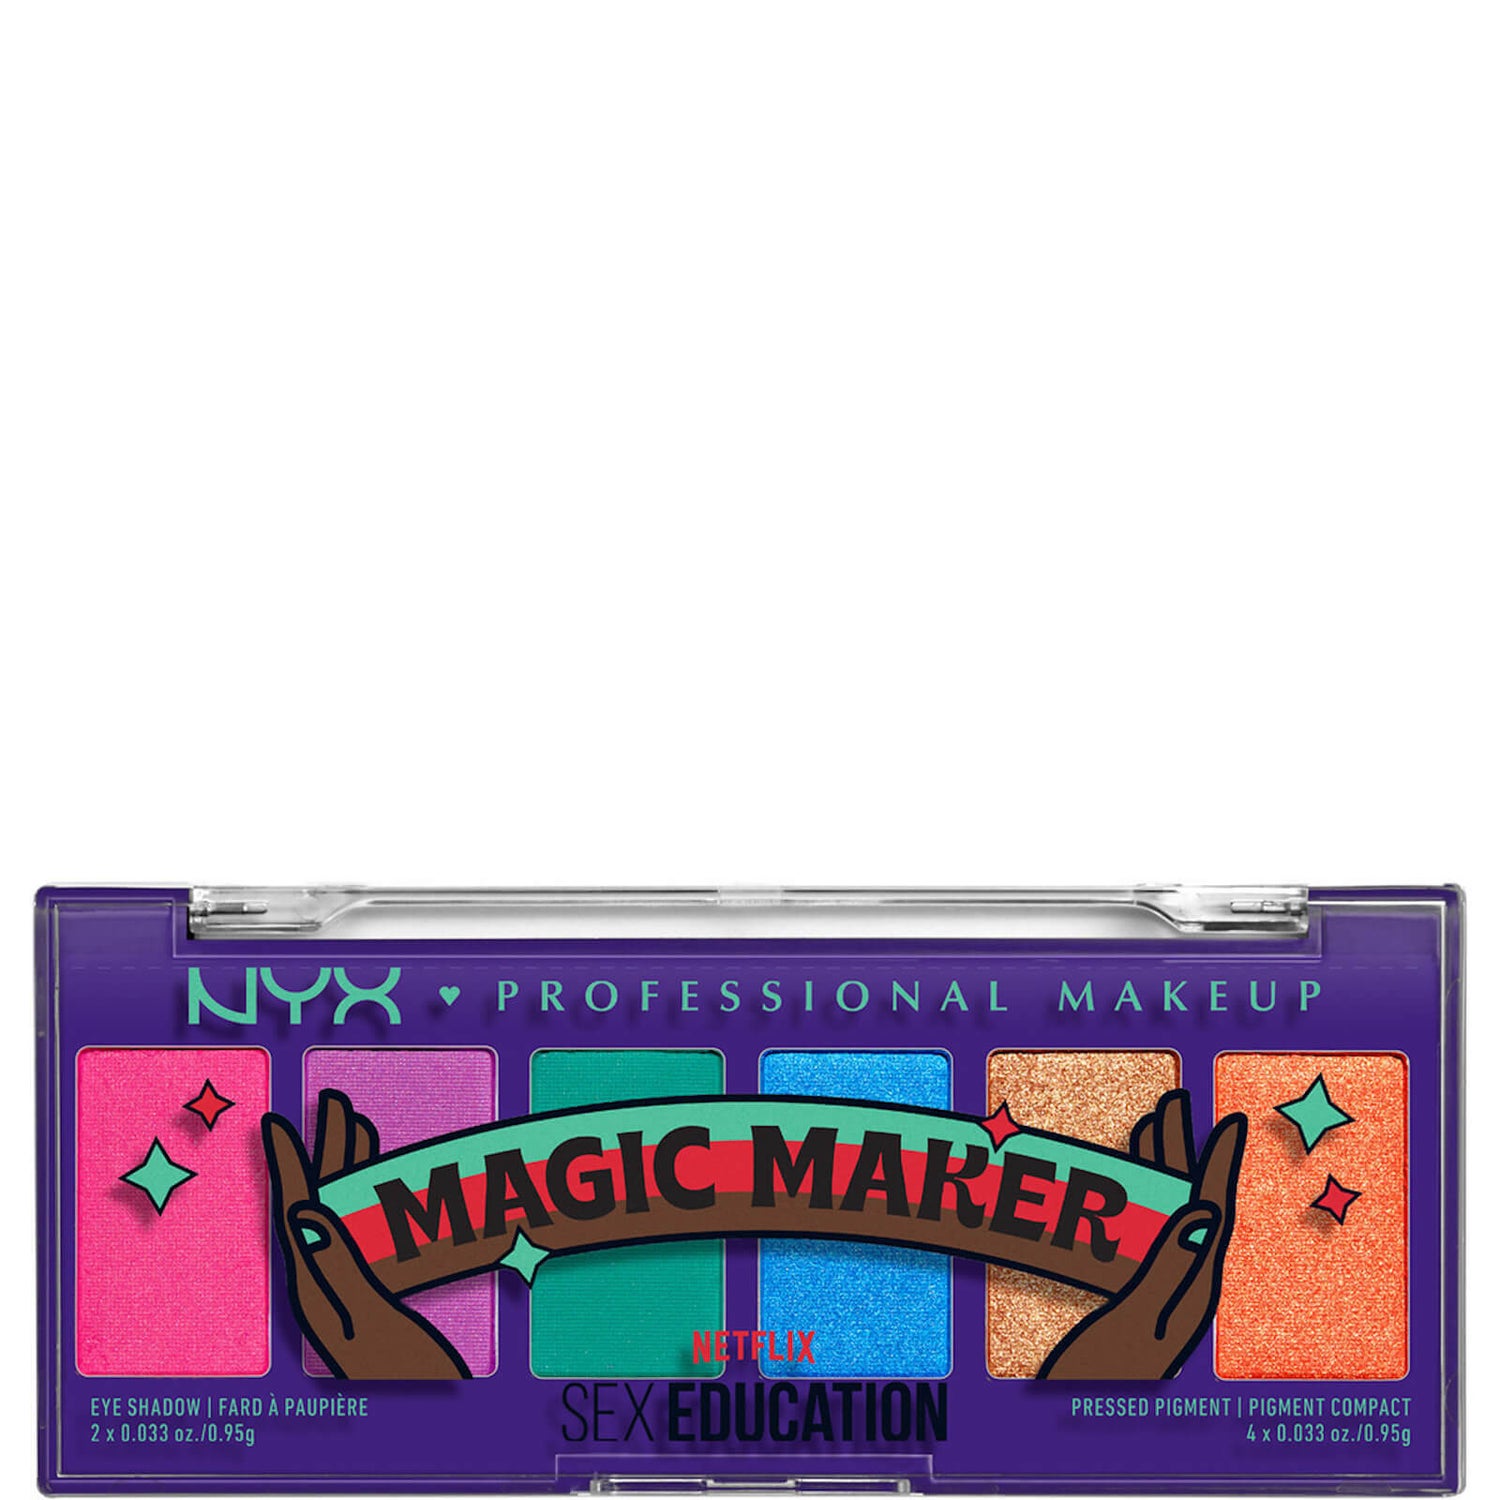 NYX Professional Makeup x Netflix's Sex Education Limited Edition 'Magic Maker' -luomiväripaletti